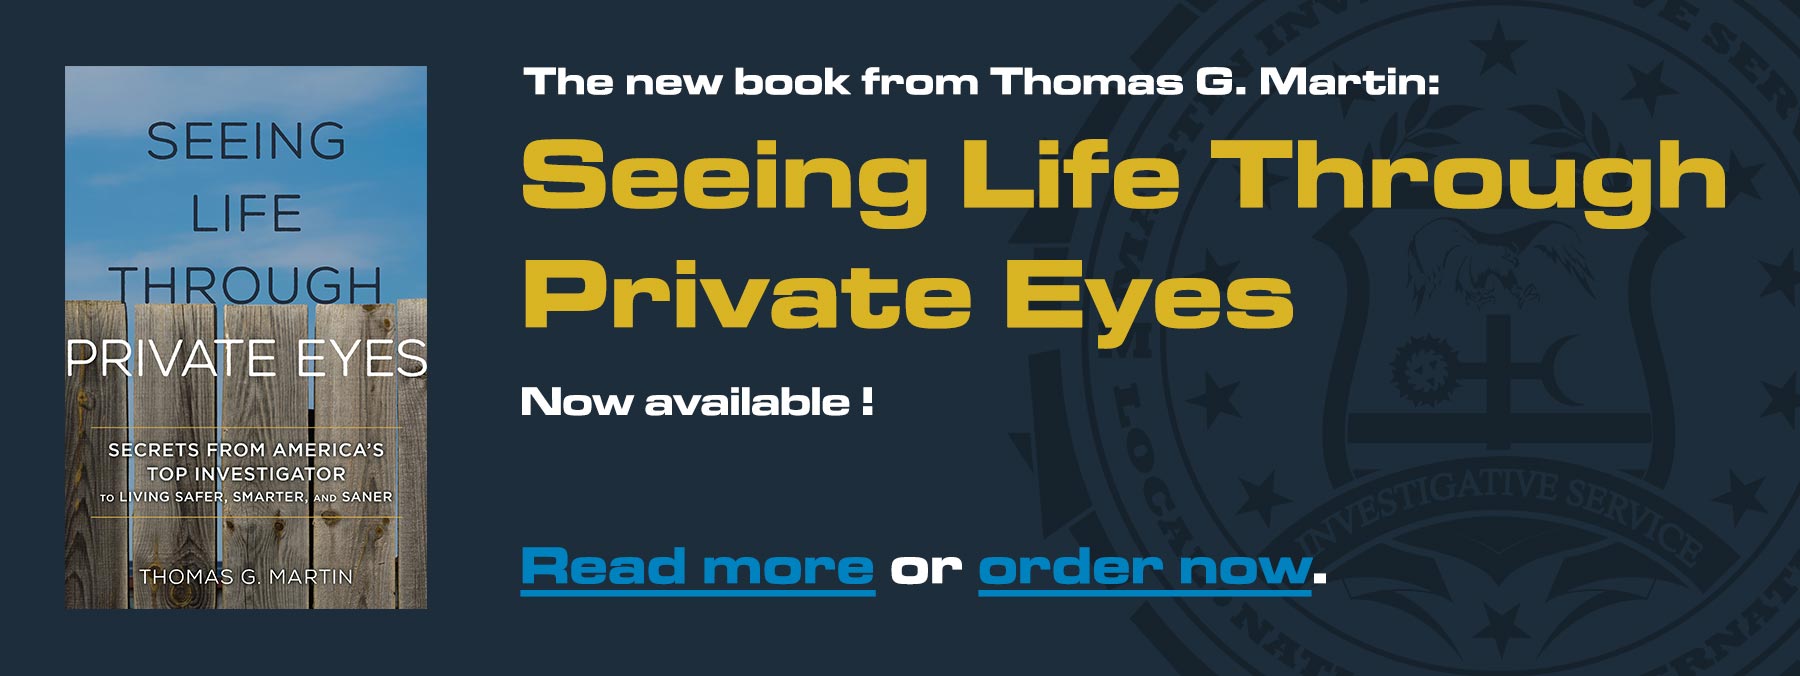 Seeing Life Through Private Eyes: The new book by Thomas G. Martin, is not available. Read more or order now.